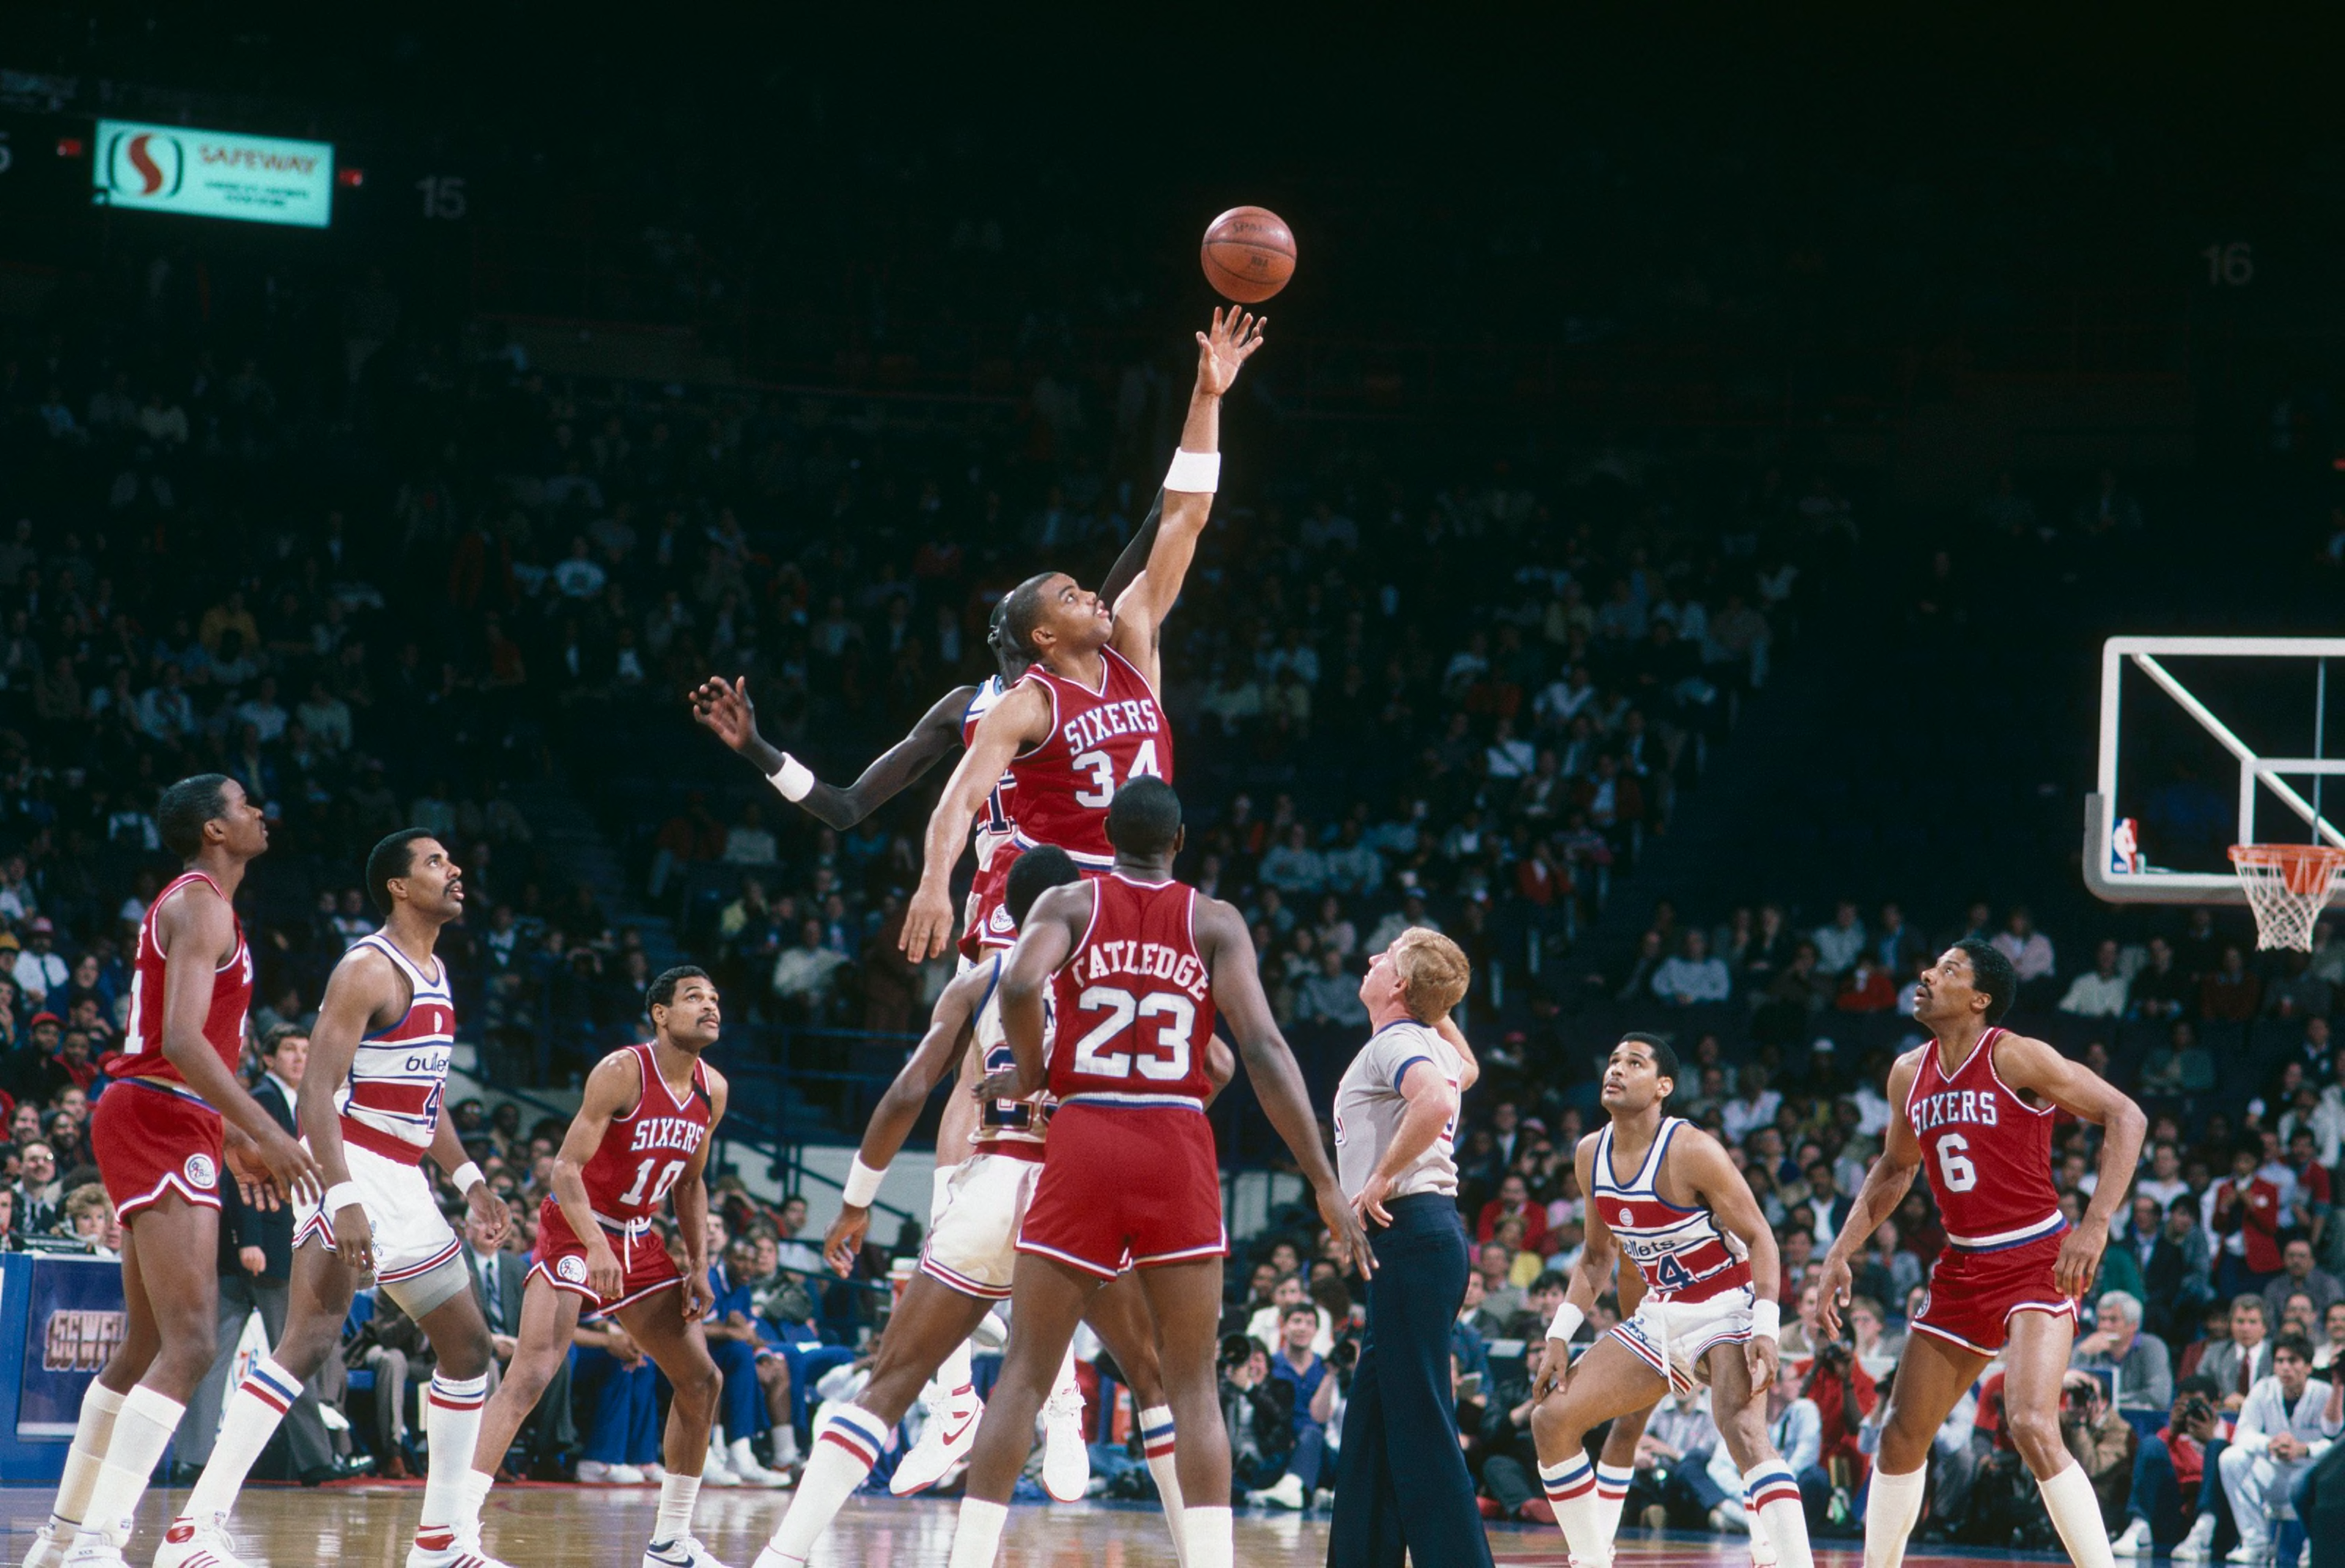 Philadelphia 76ers - [Repost] #OTD in 1992, Charles Barkley grabbed 14  rebounds and passed Billy Cunningham for most rebounds in a @sixers jersey.  Barkley's total of 7079 boards, however, still leaves him